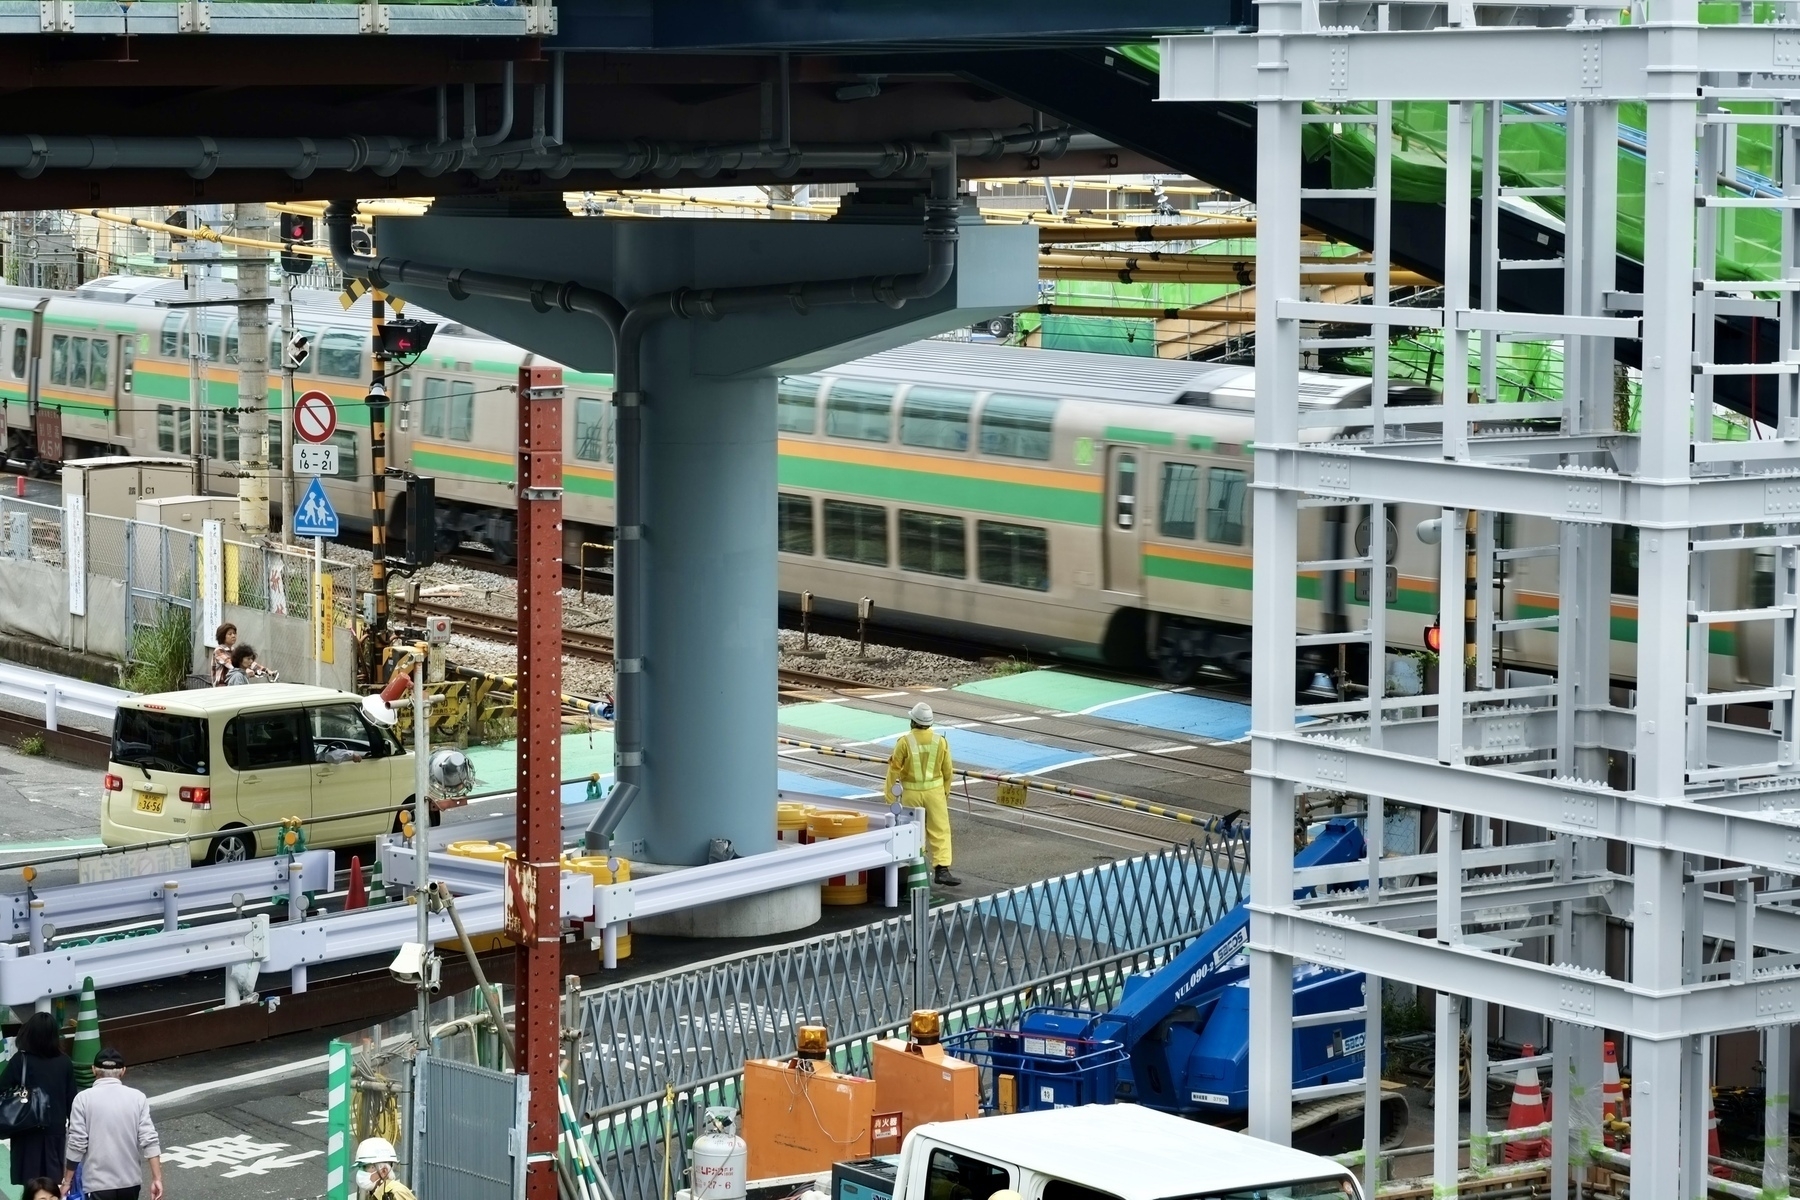 Rail crossing across tracks at JR Totsuka station, showing start of construction in 2013. 